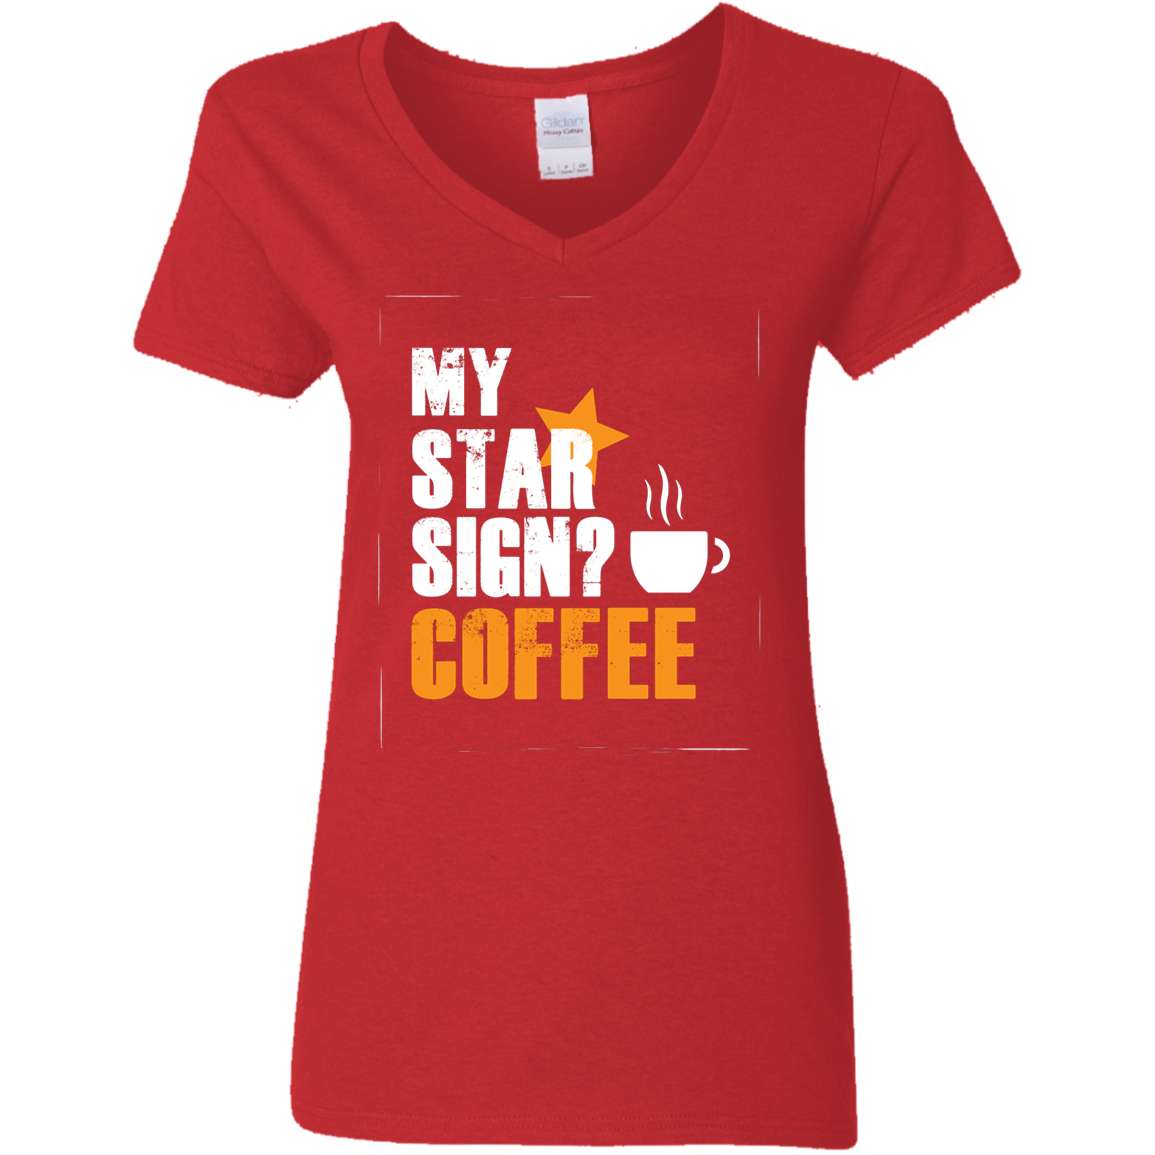 My star sign Coffee - Coffee the star sign, Coffee person T-shirt